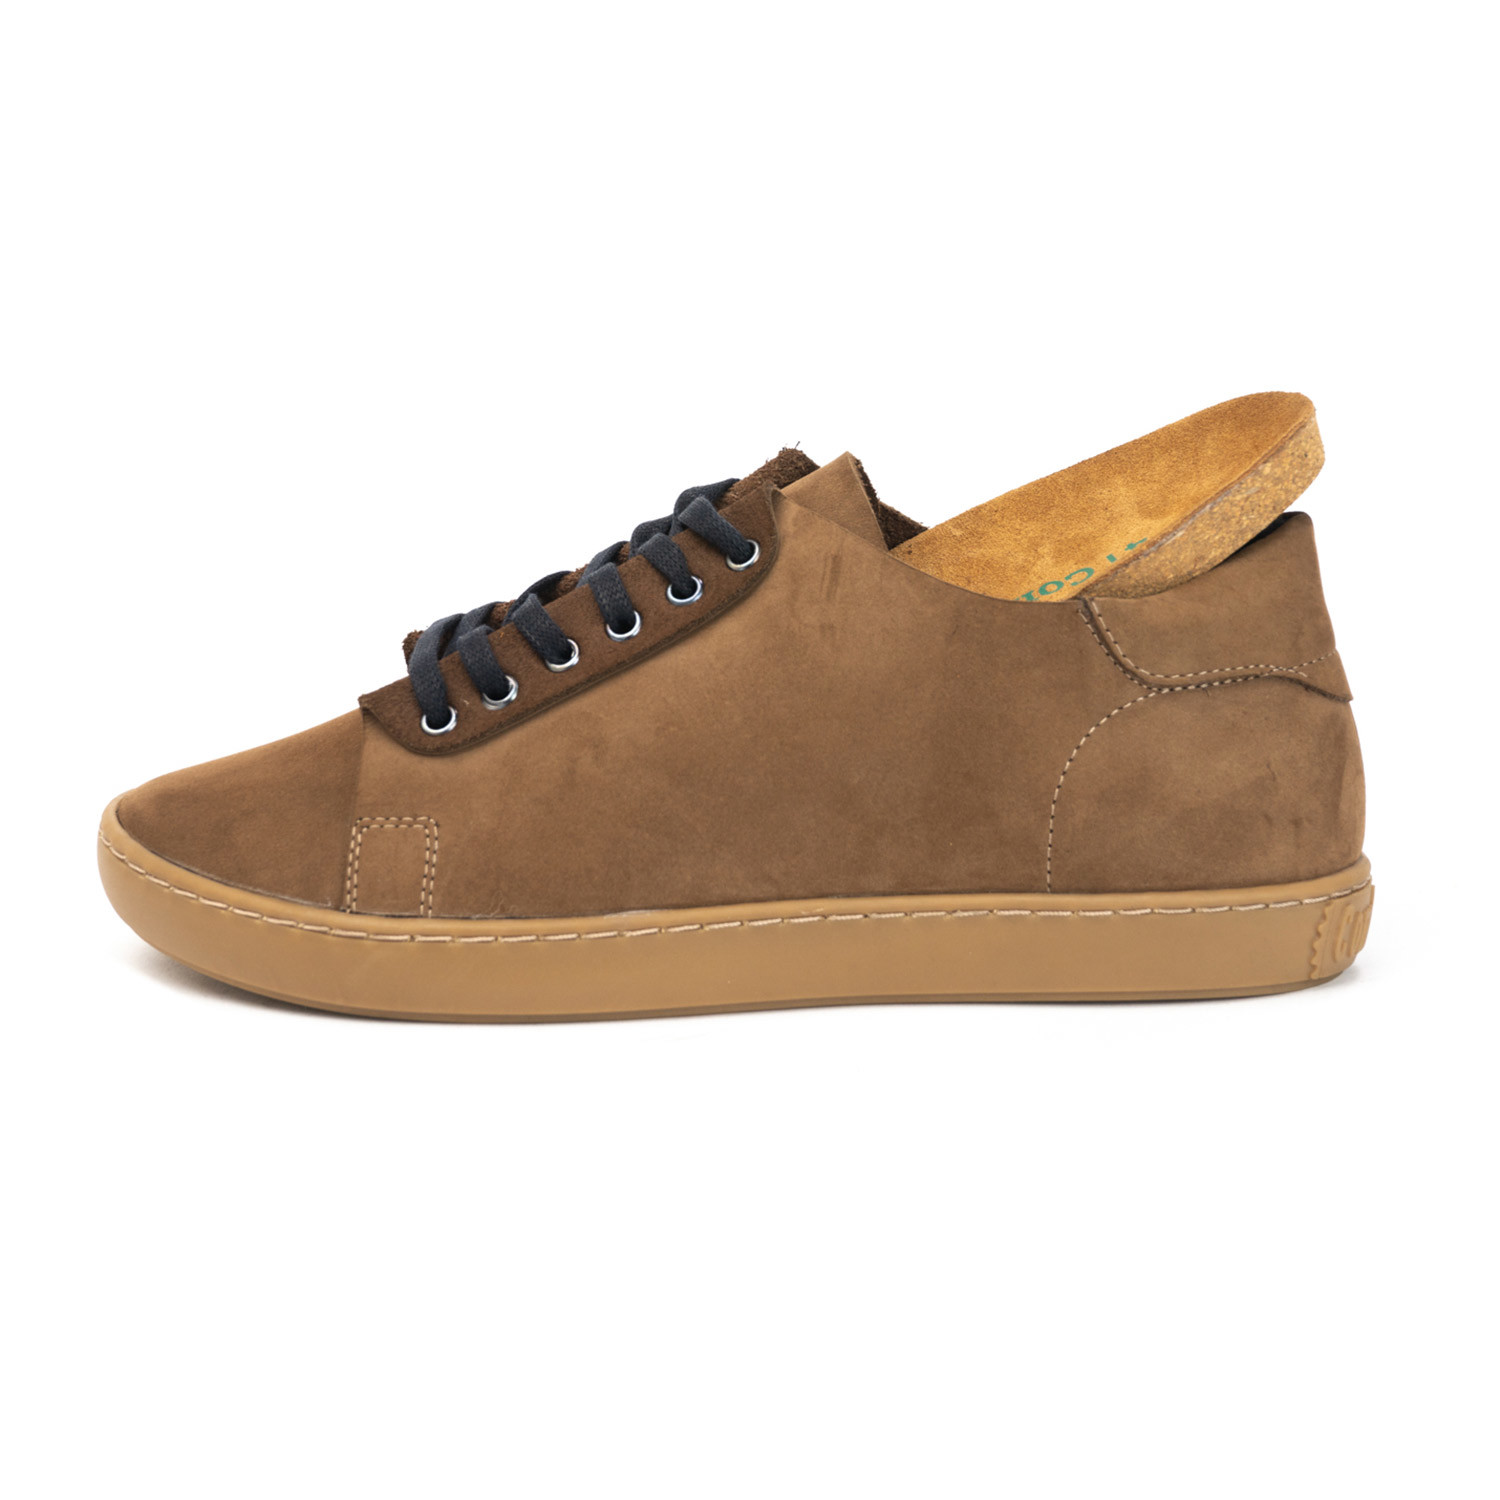 Ozi Sneaker // Sand (Men's Euro Size 43) - Clearance: Boots + Sneakers ...